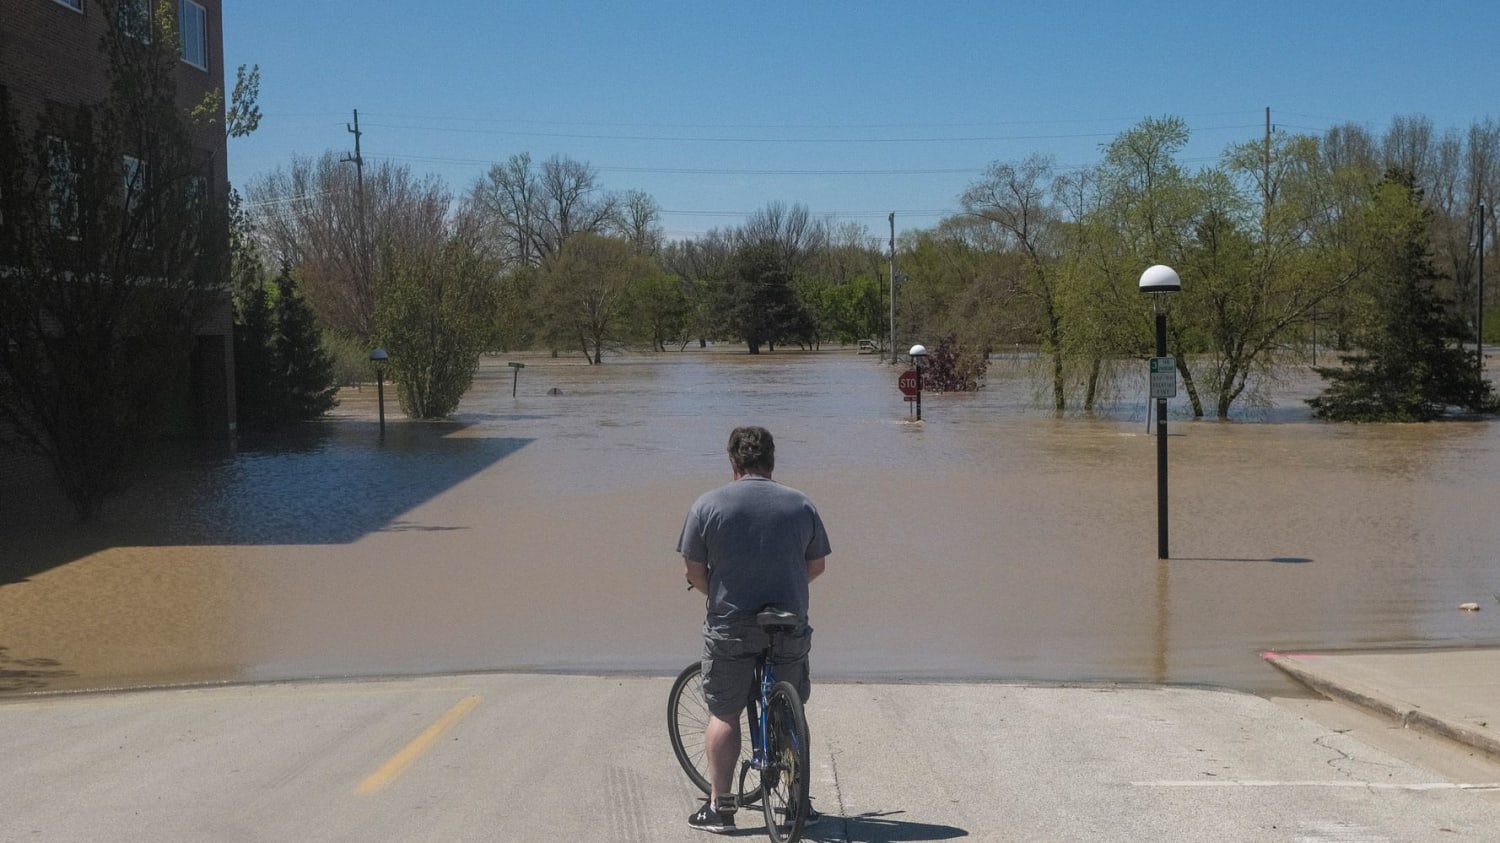 Weather Disasters Are Mounting Amid The Pandemic. Michigan Floods Are Just The Latest.